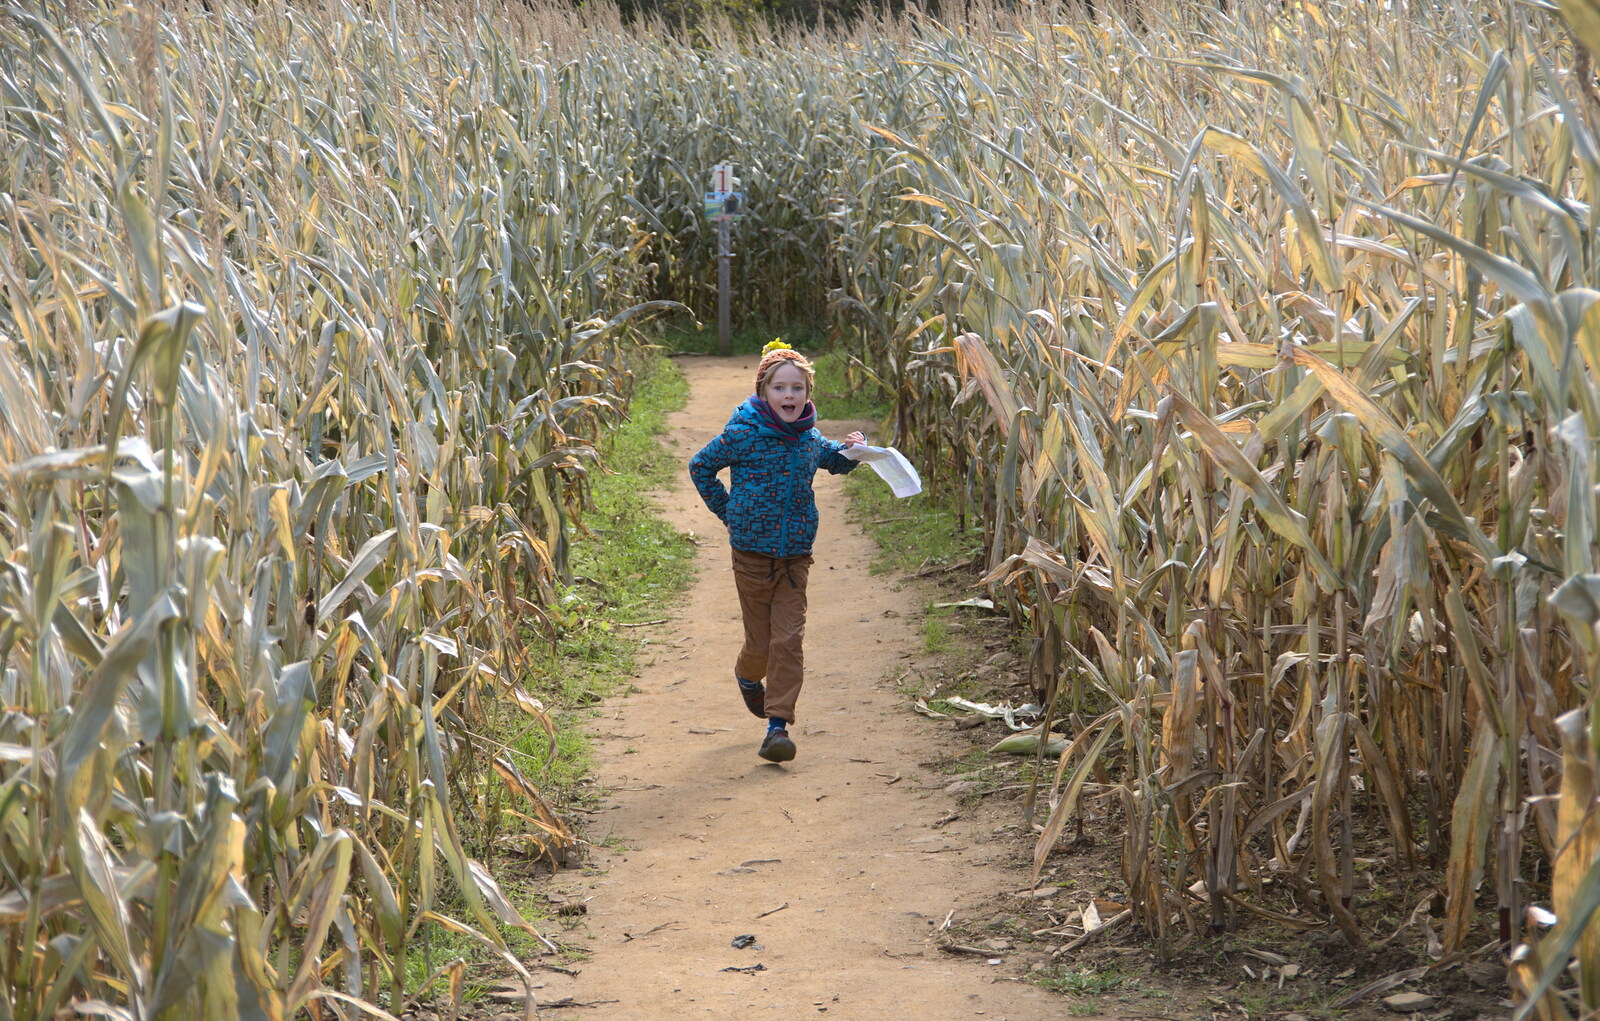 Harry runs out of the maze from Pumpkin Picking at Alstede Farm, Chester, Morris County, New Jersey - 24th October 2018